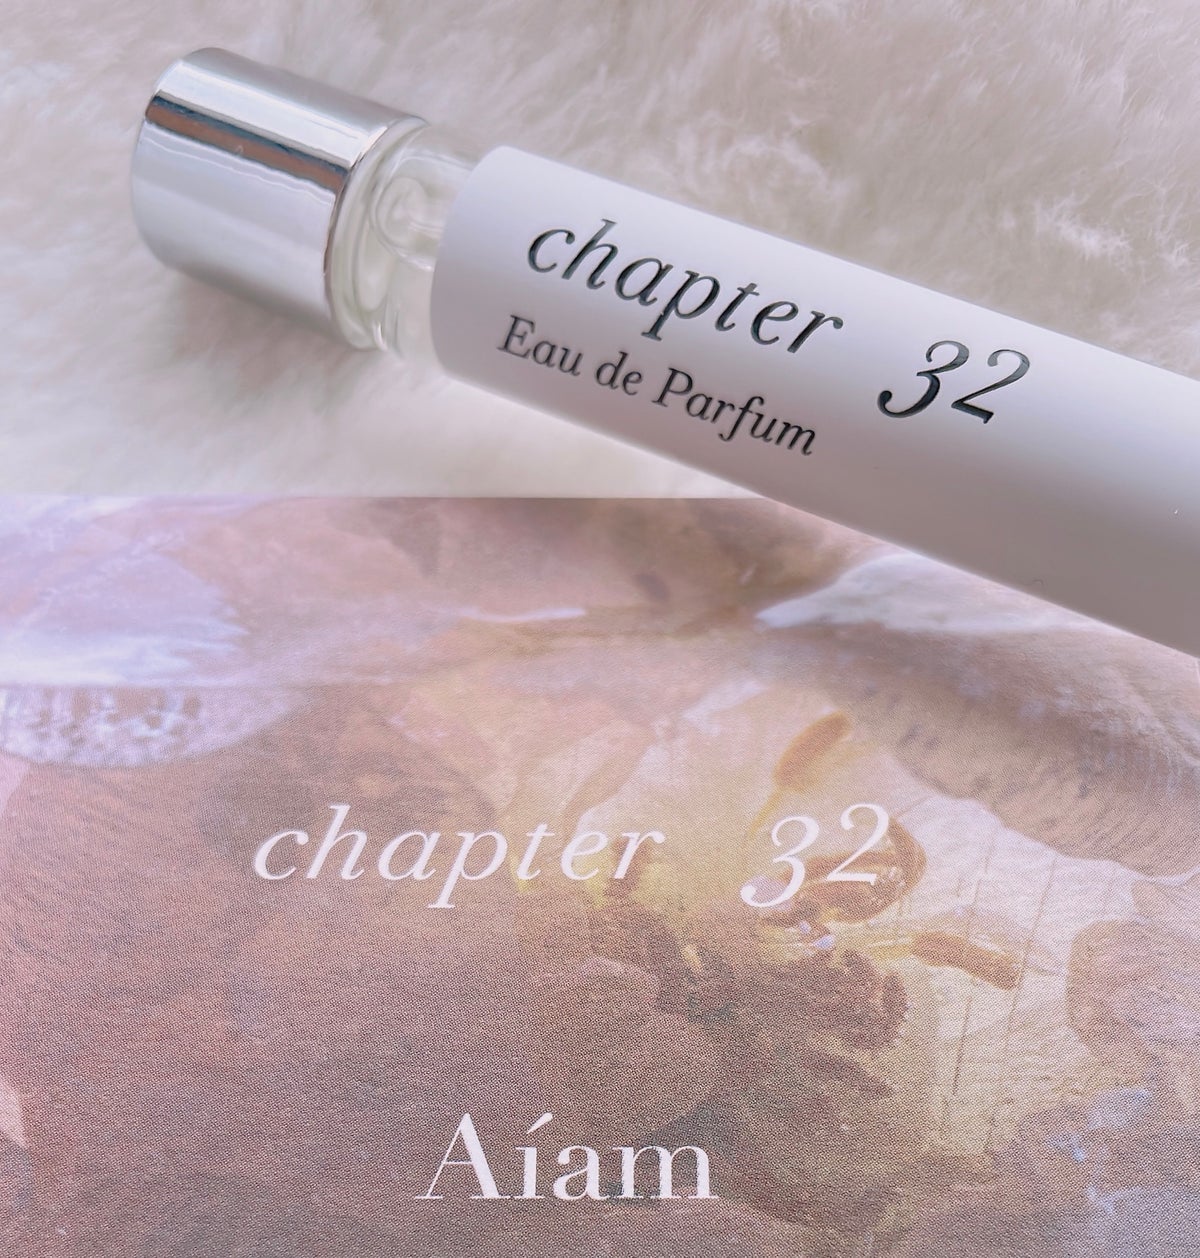 Aiam chapter32 50ml